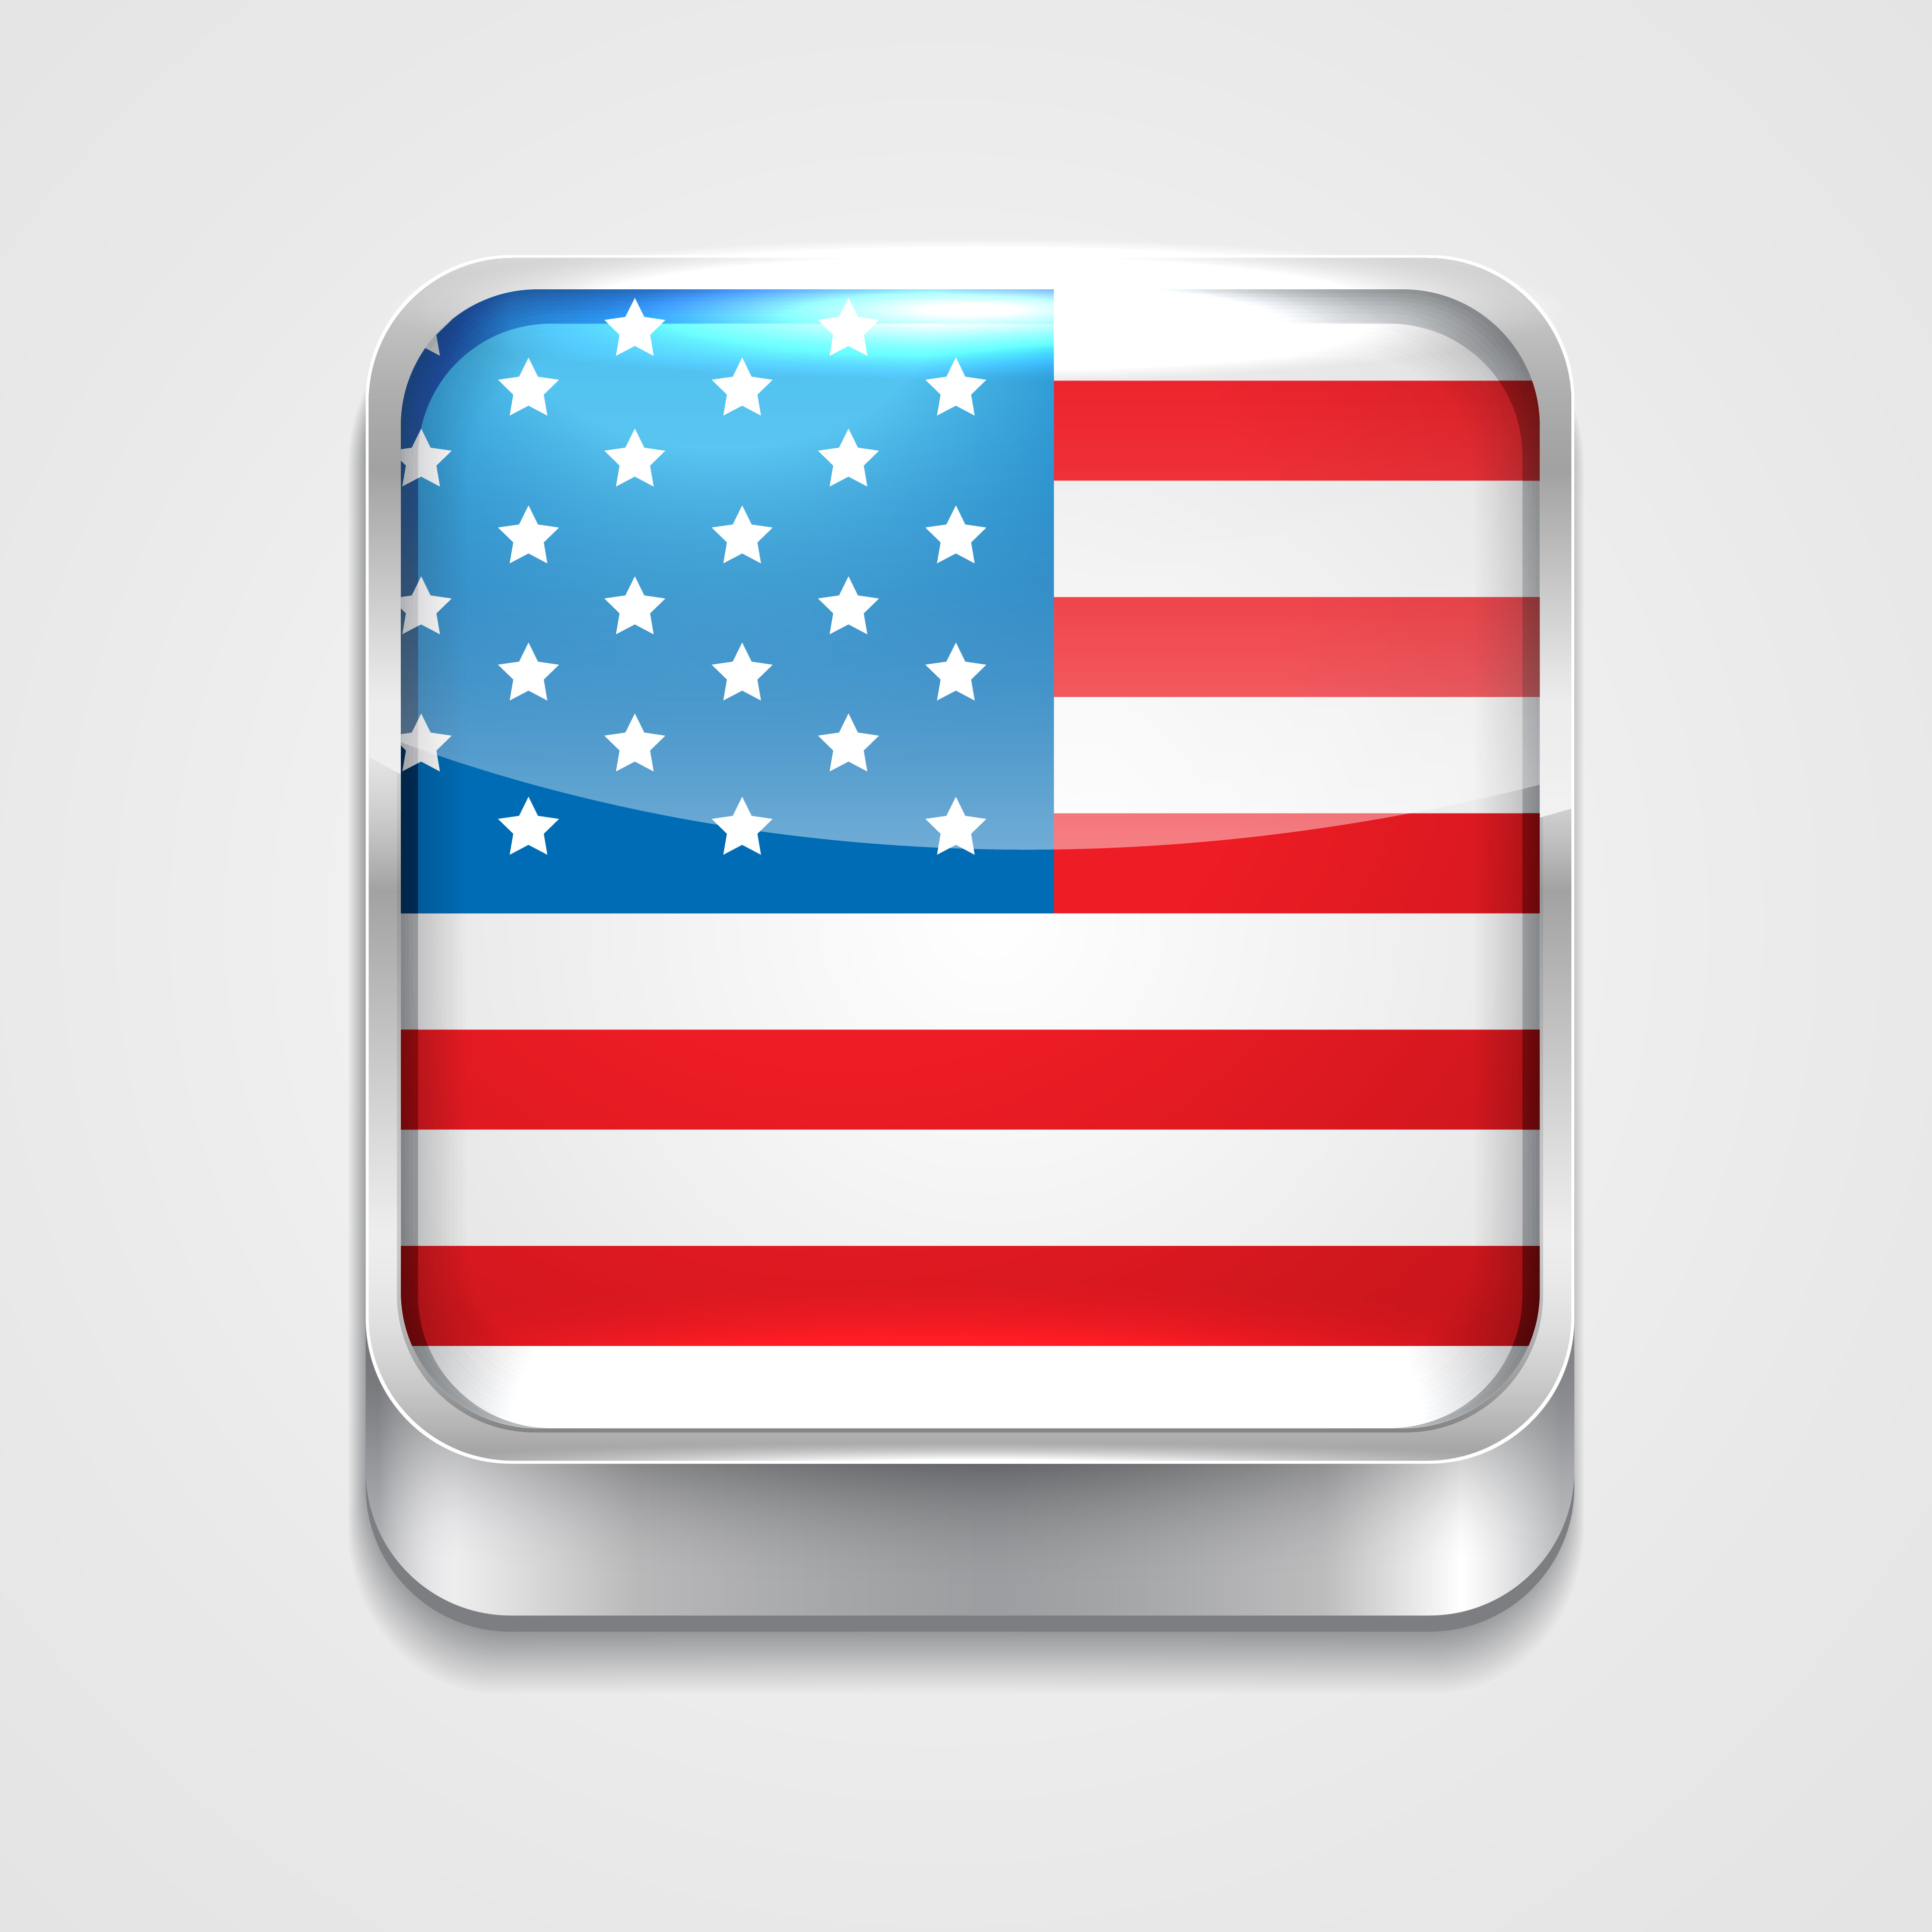 Download United States Flag Free Vector Art - (3831 Free Downloads)